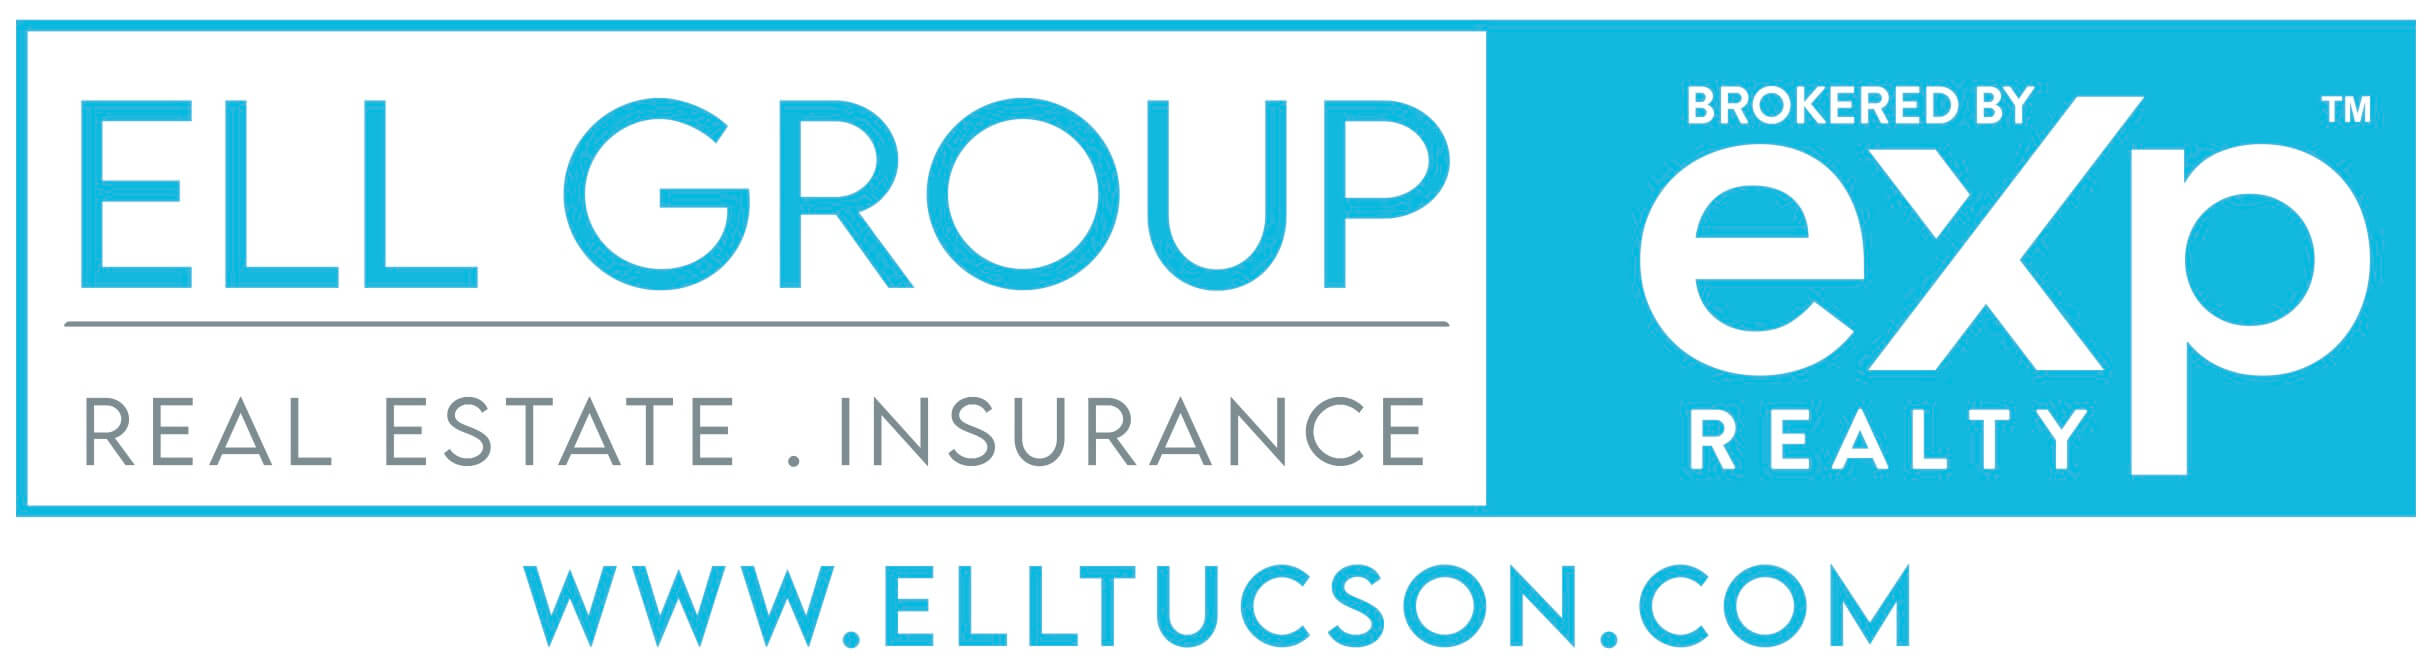 Ell Group Real Estate